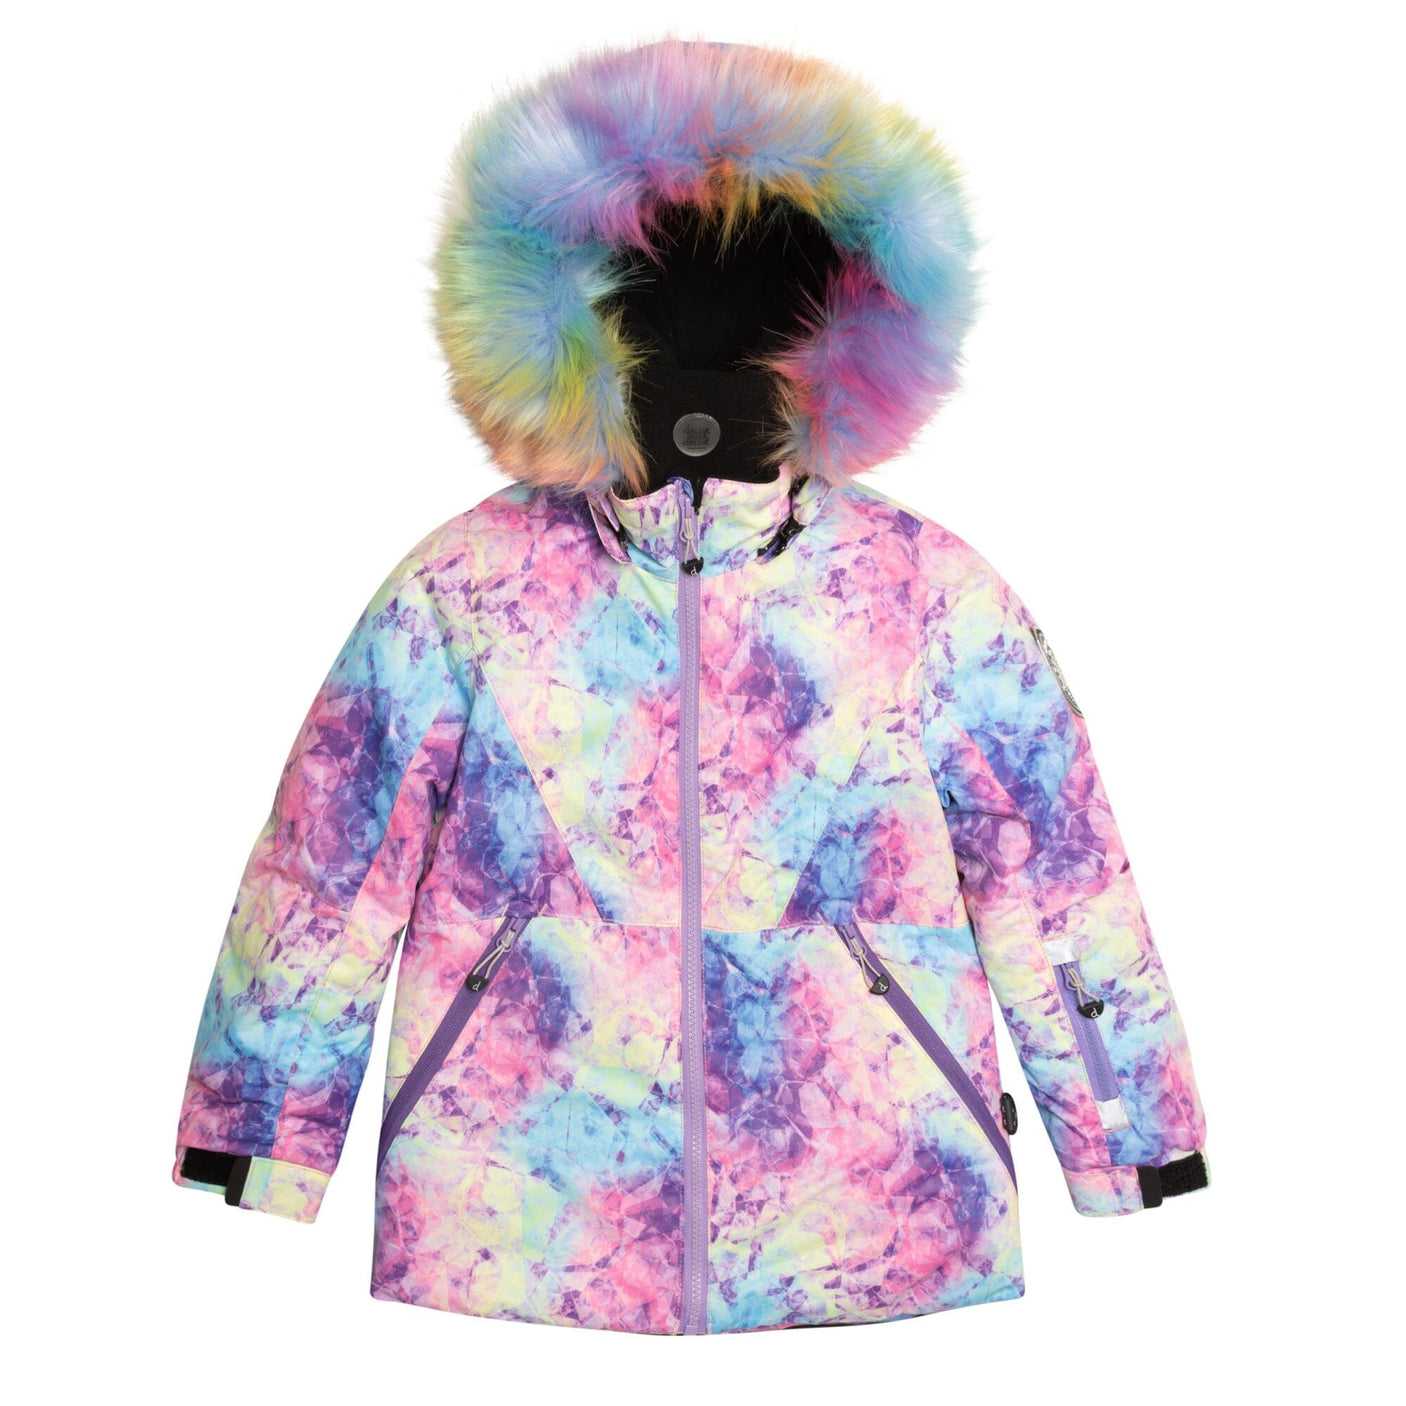 Two Piece Snowsuit Lavender With Frosted Rainbow Print-2